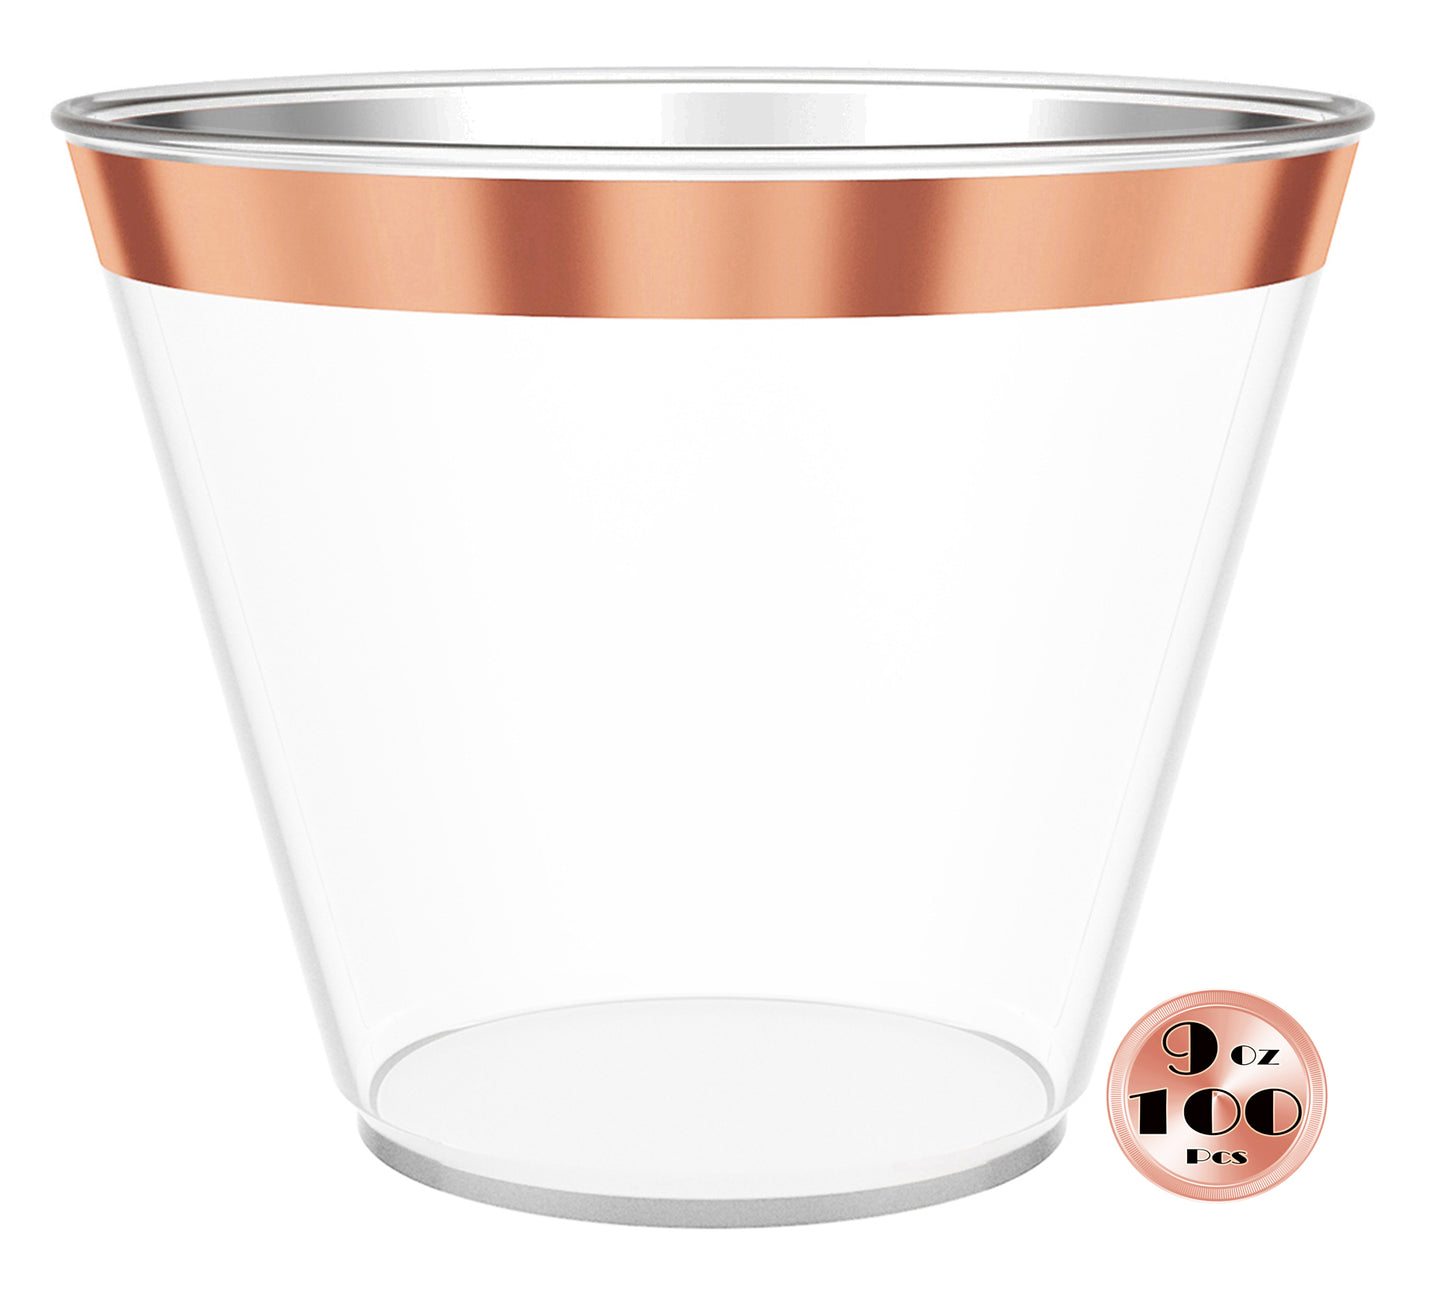 JL Prime 100 Rose Gold Plastic Cups, 9 Oz Heavy Duty Reusable Disposable Rose Gold Rim Clear Plastic Cups, Old Fashioned Tumblers, Hard Plastic Drinking Cups for Party and Wedding